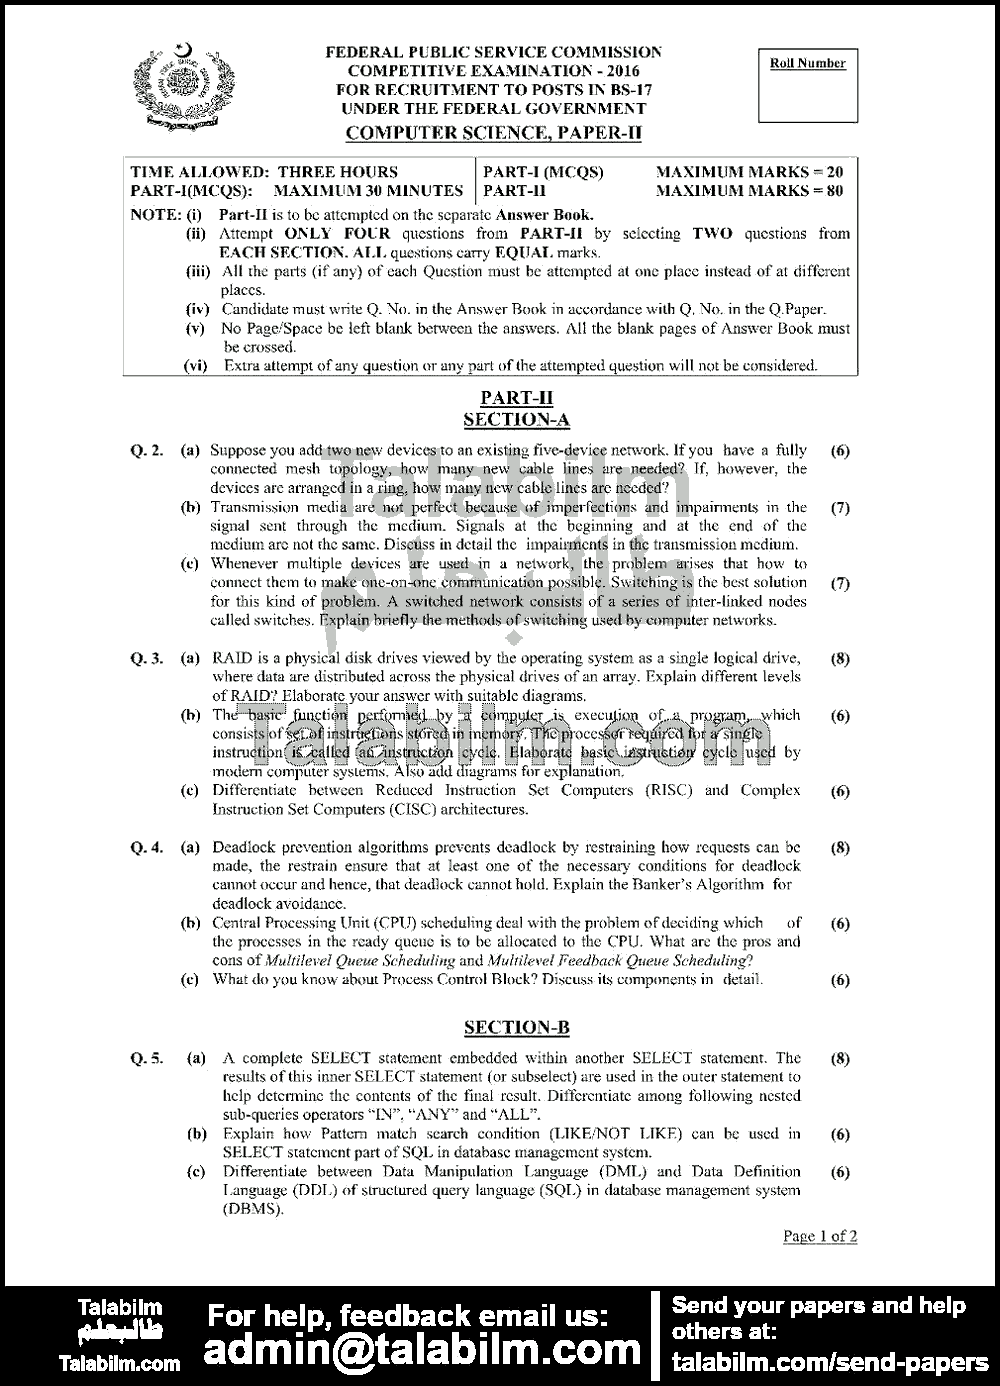 Computer Science 0 past paper for 2016 Page No. 3